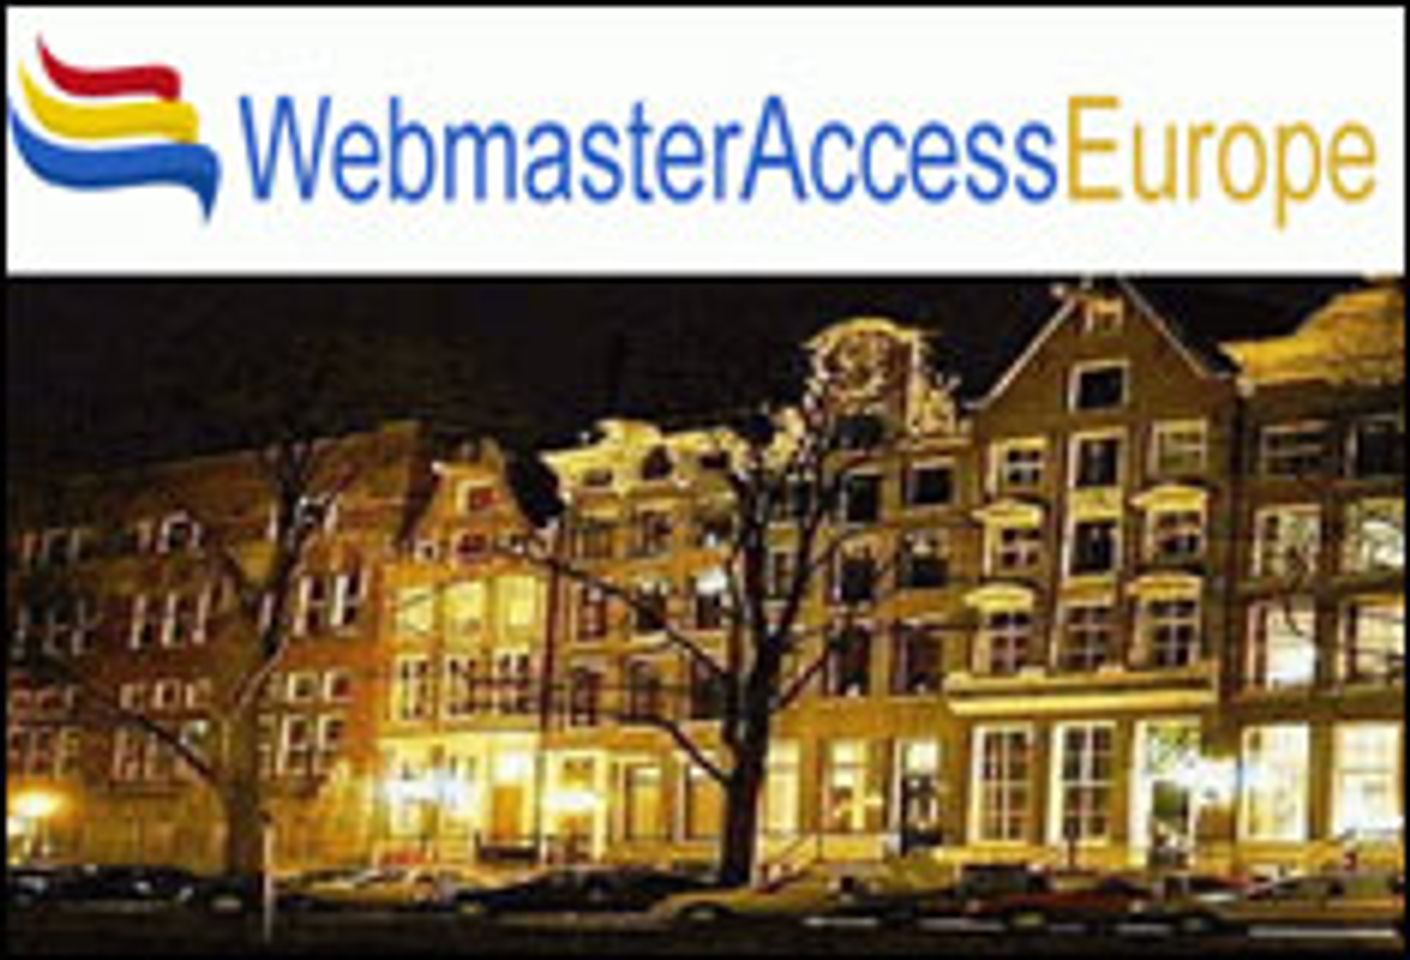 Sapphic Cash Ups the Ante for Webmaster Access Europe